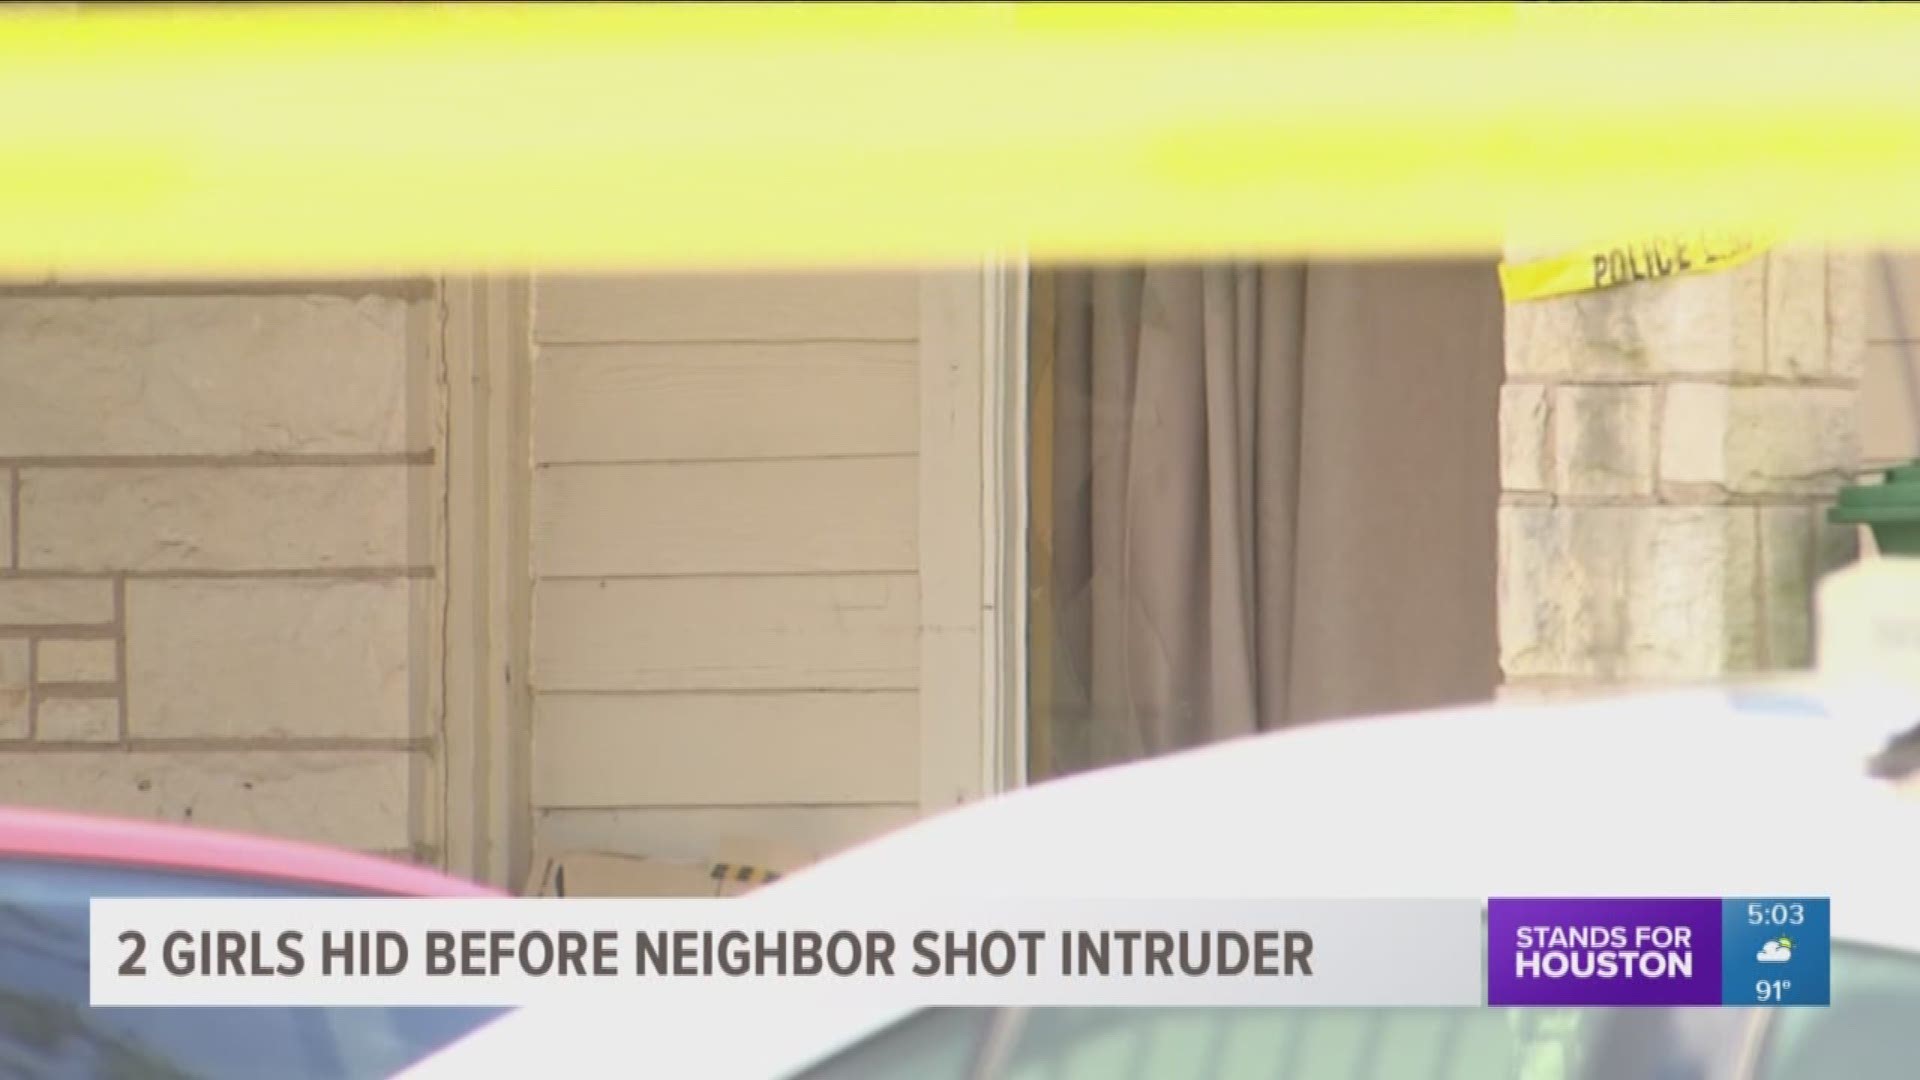 Police say a suspected burglar was shot by a neighbor outside a southeast Houston home on Tuesday morning. It happened as two young girls hid inside the home.